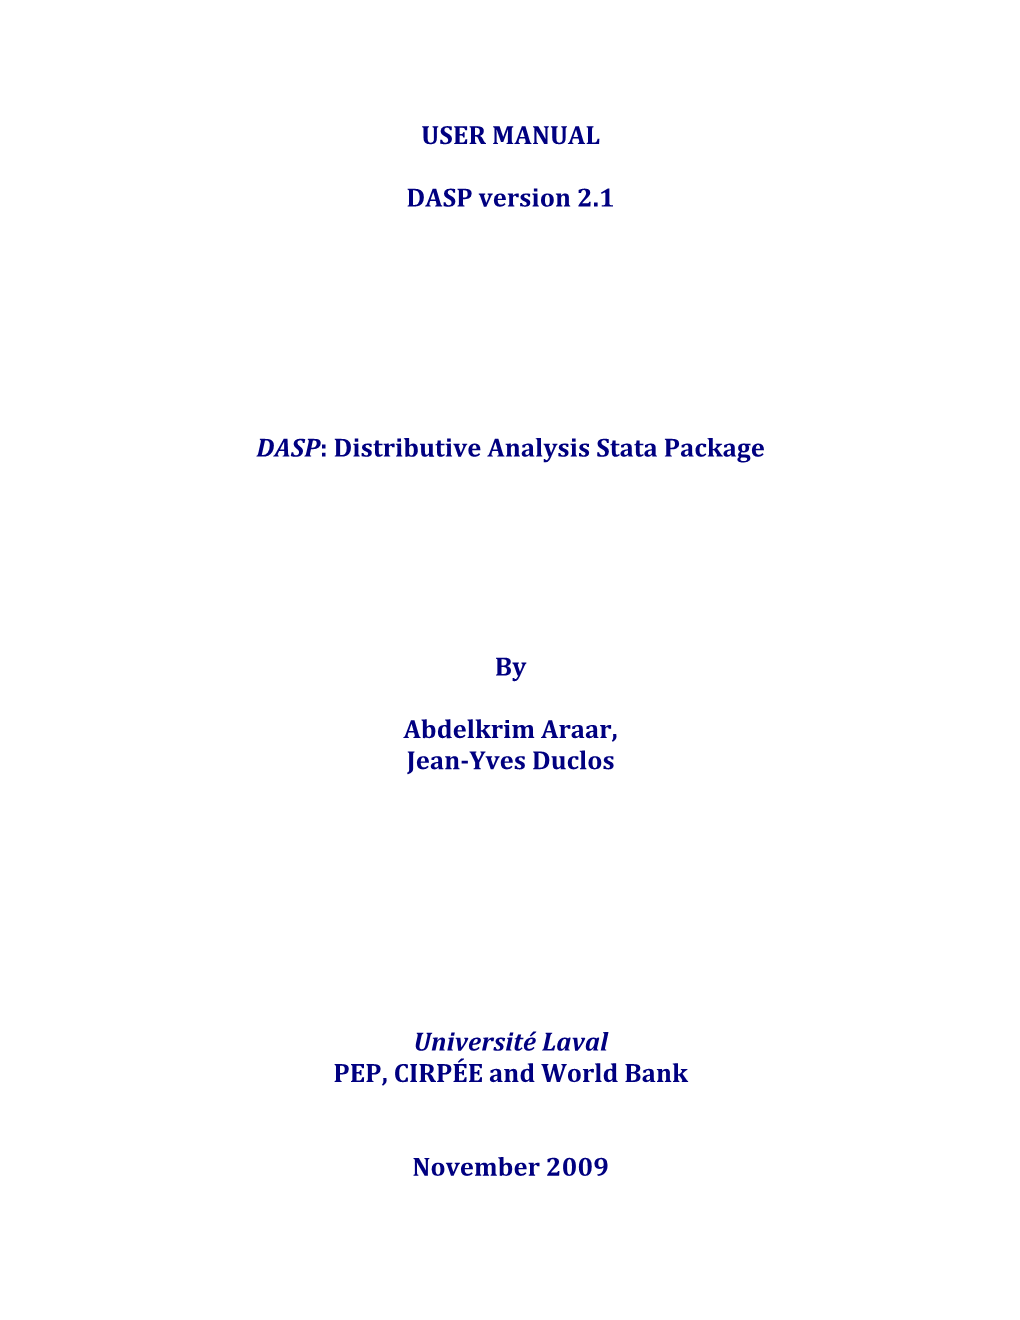 User Manual for Stata Package DASP